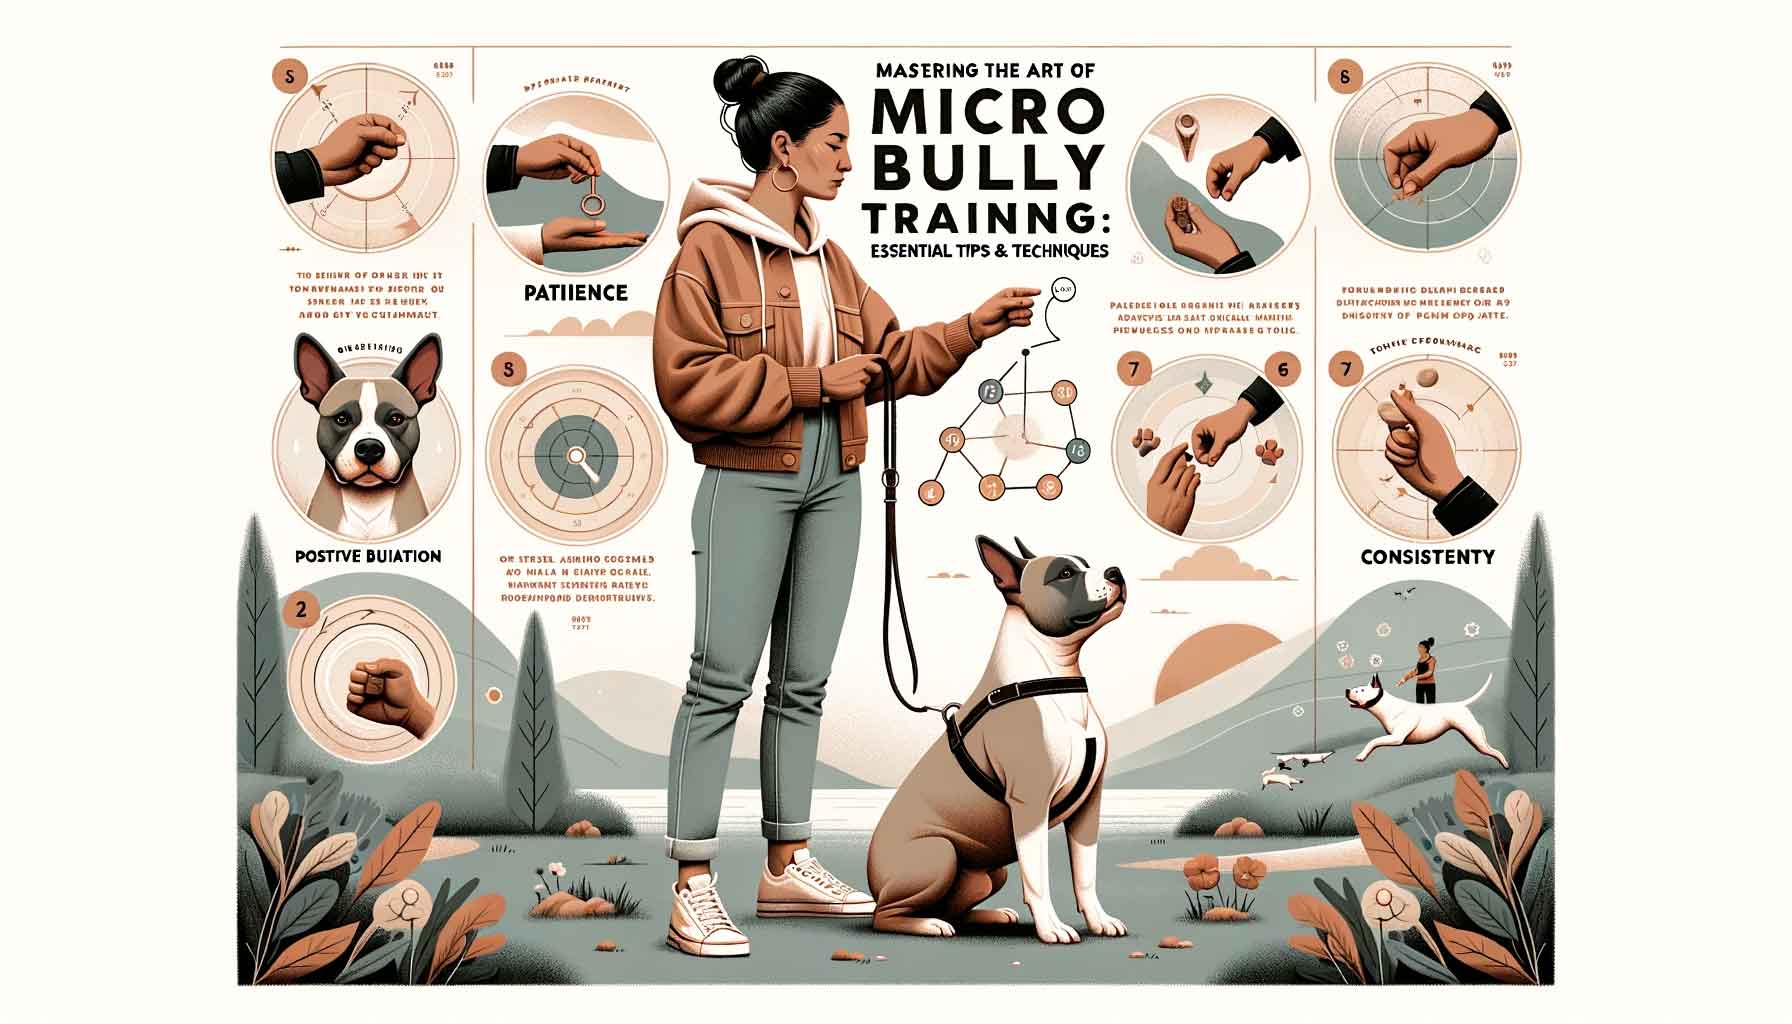 A Micro Bully engaging with a training clicker and harness, with a diverse female trainer in the backdrop offering a treat. The background is soft and muted, with infographics highlighting key training concepts. The blog title is prominently displayed at the top.